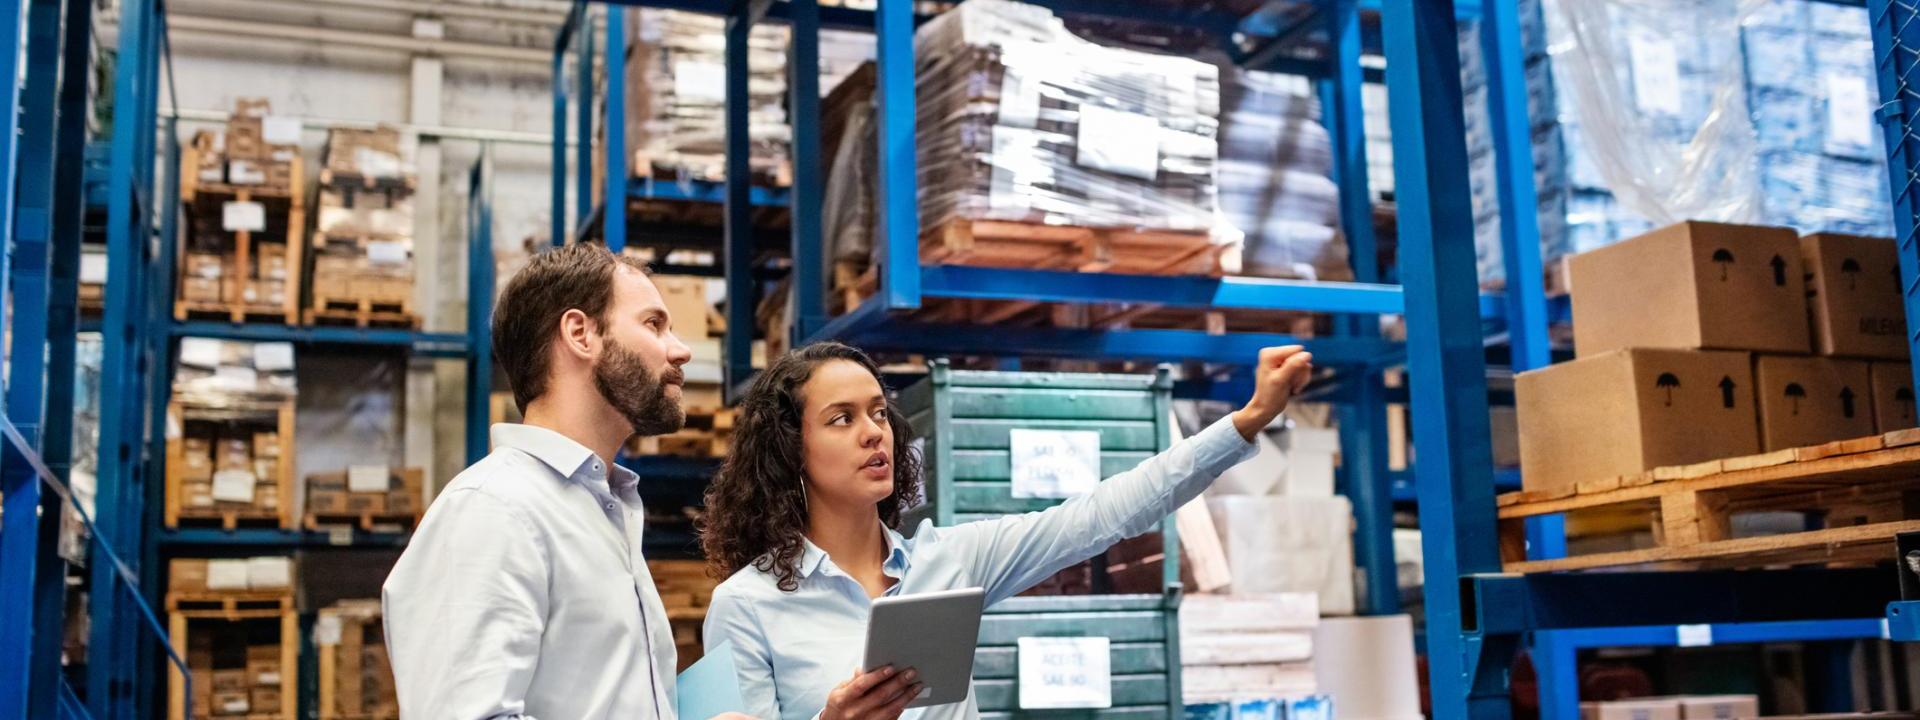 A man and woman look in the direction of her outward stretched hand in a warehouse that has stacks of boxes and product.